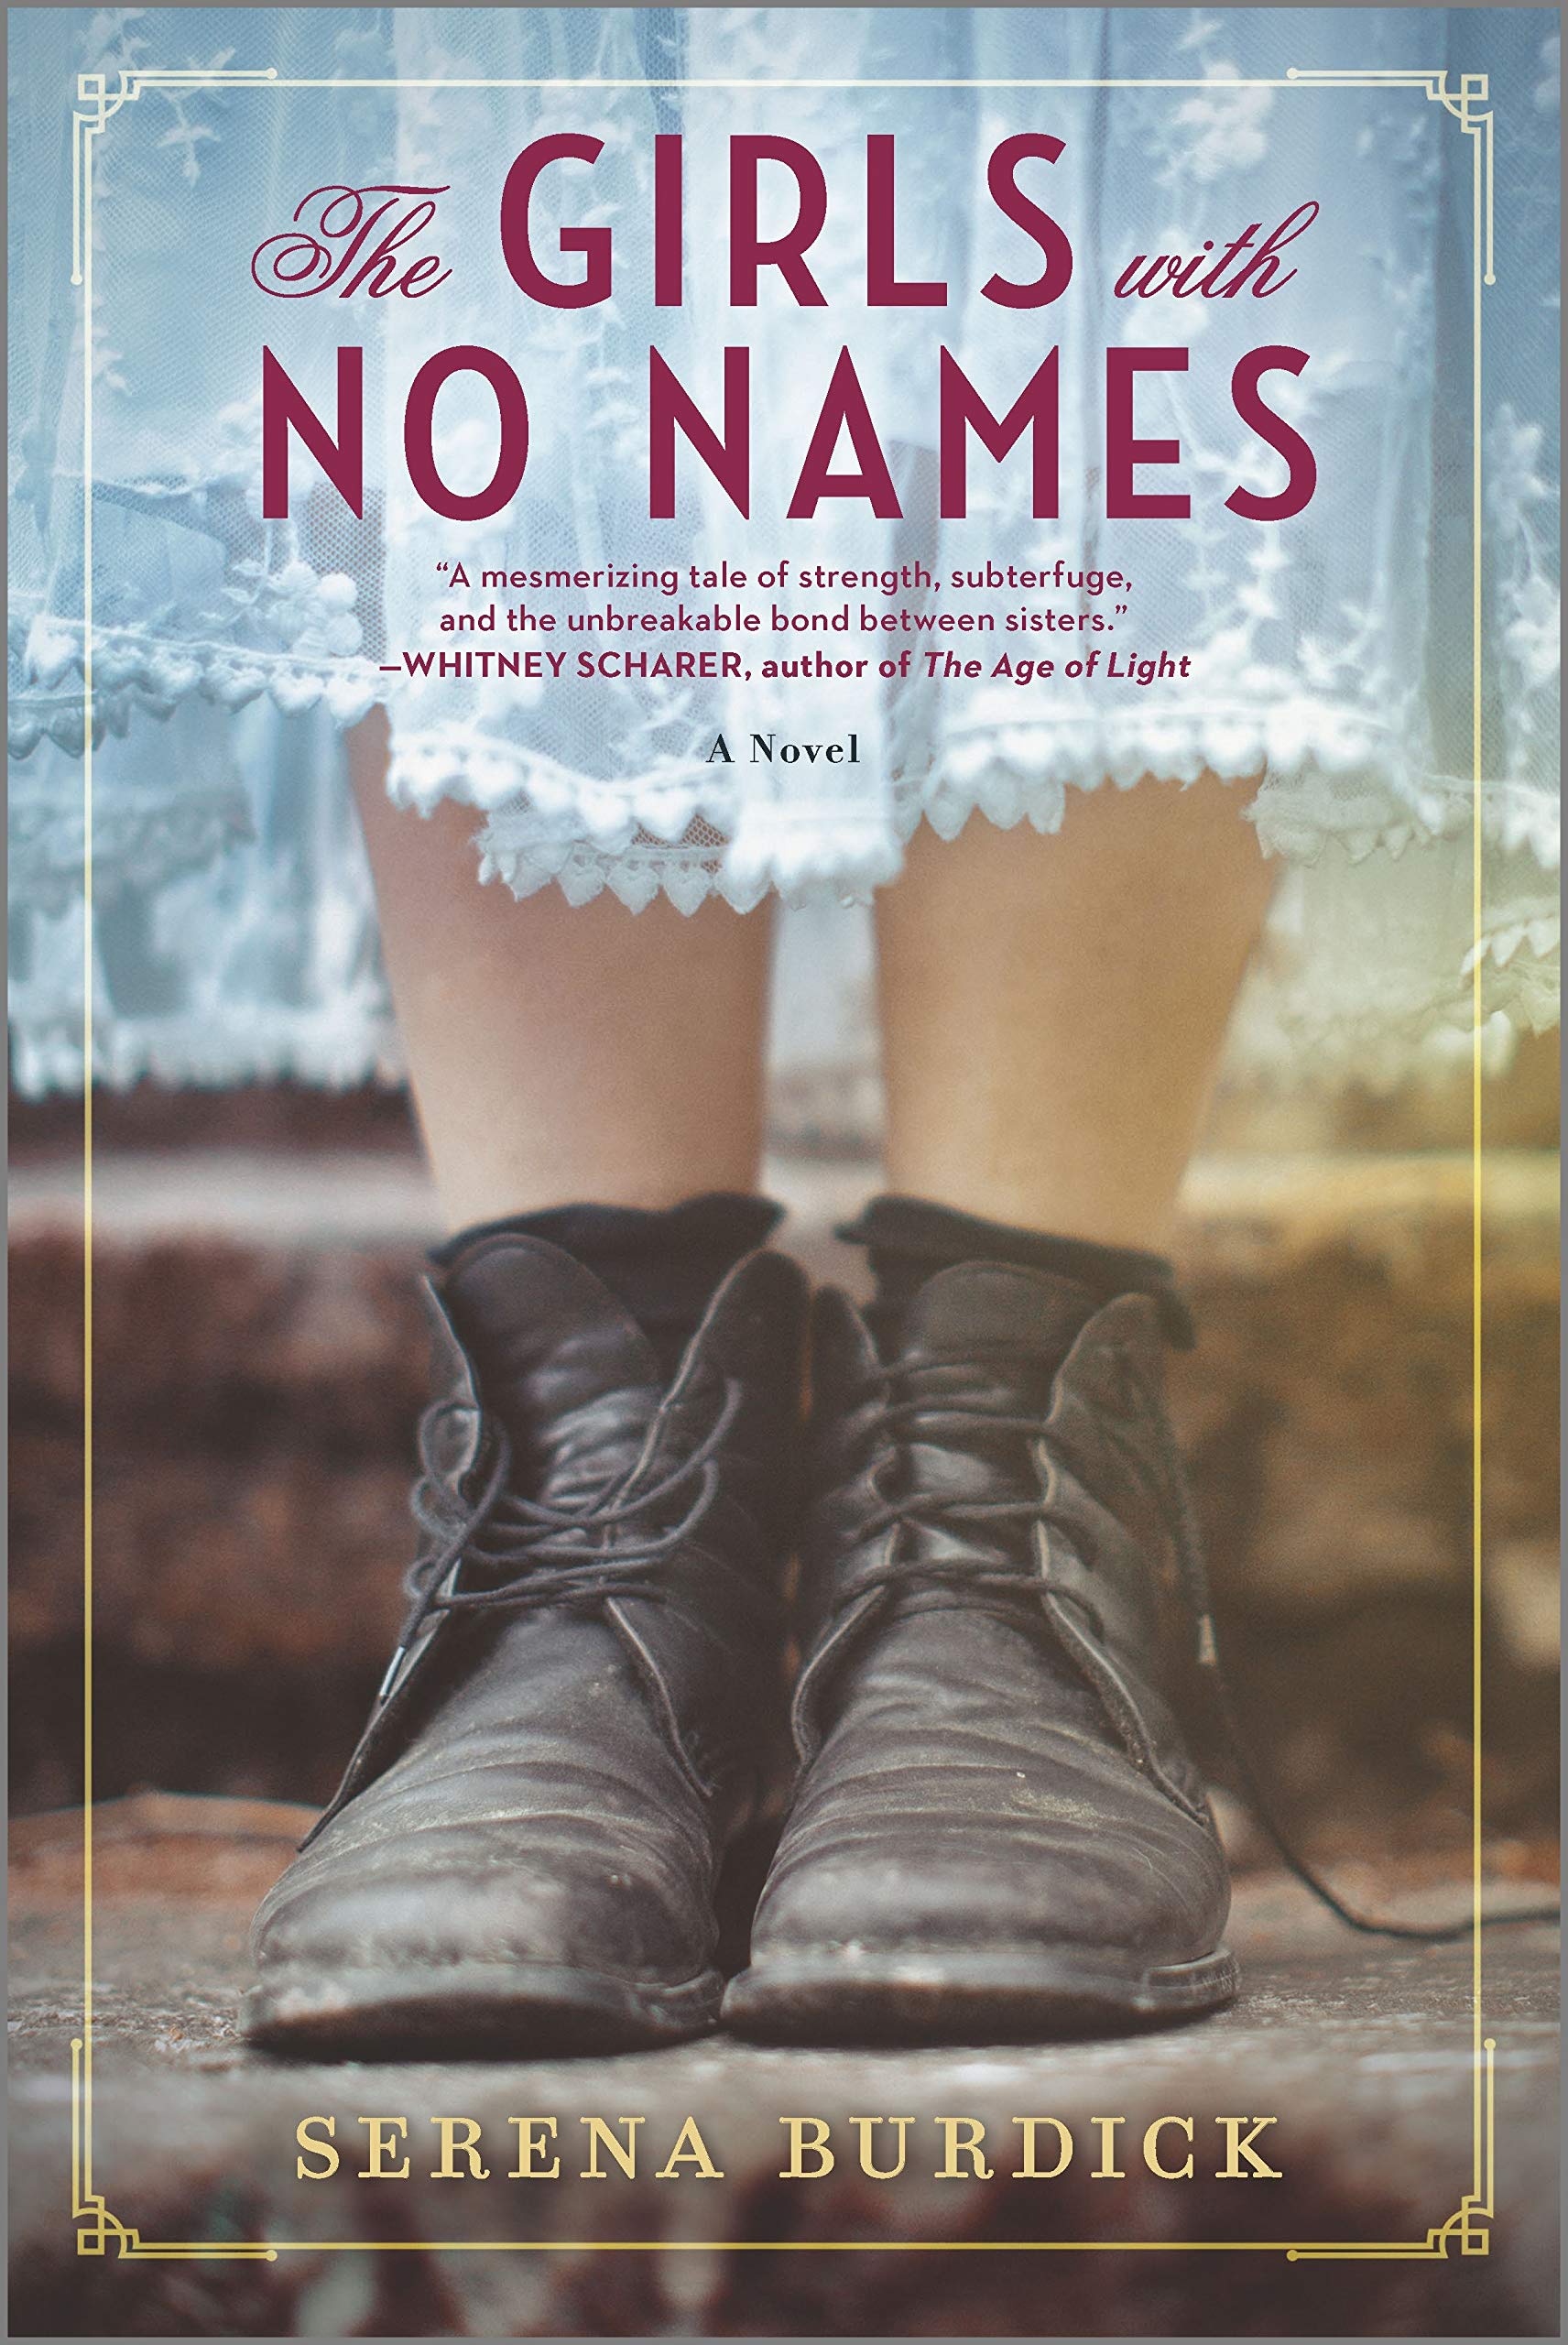 ARC Review: “The Girls With No Names” by Serena Burdick